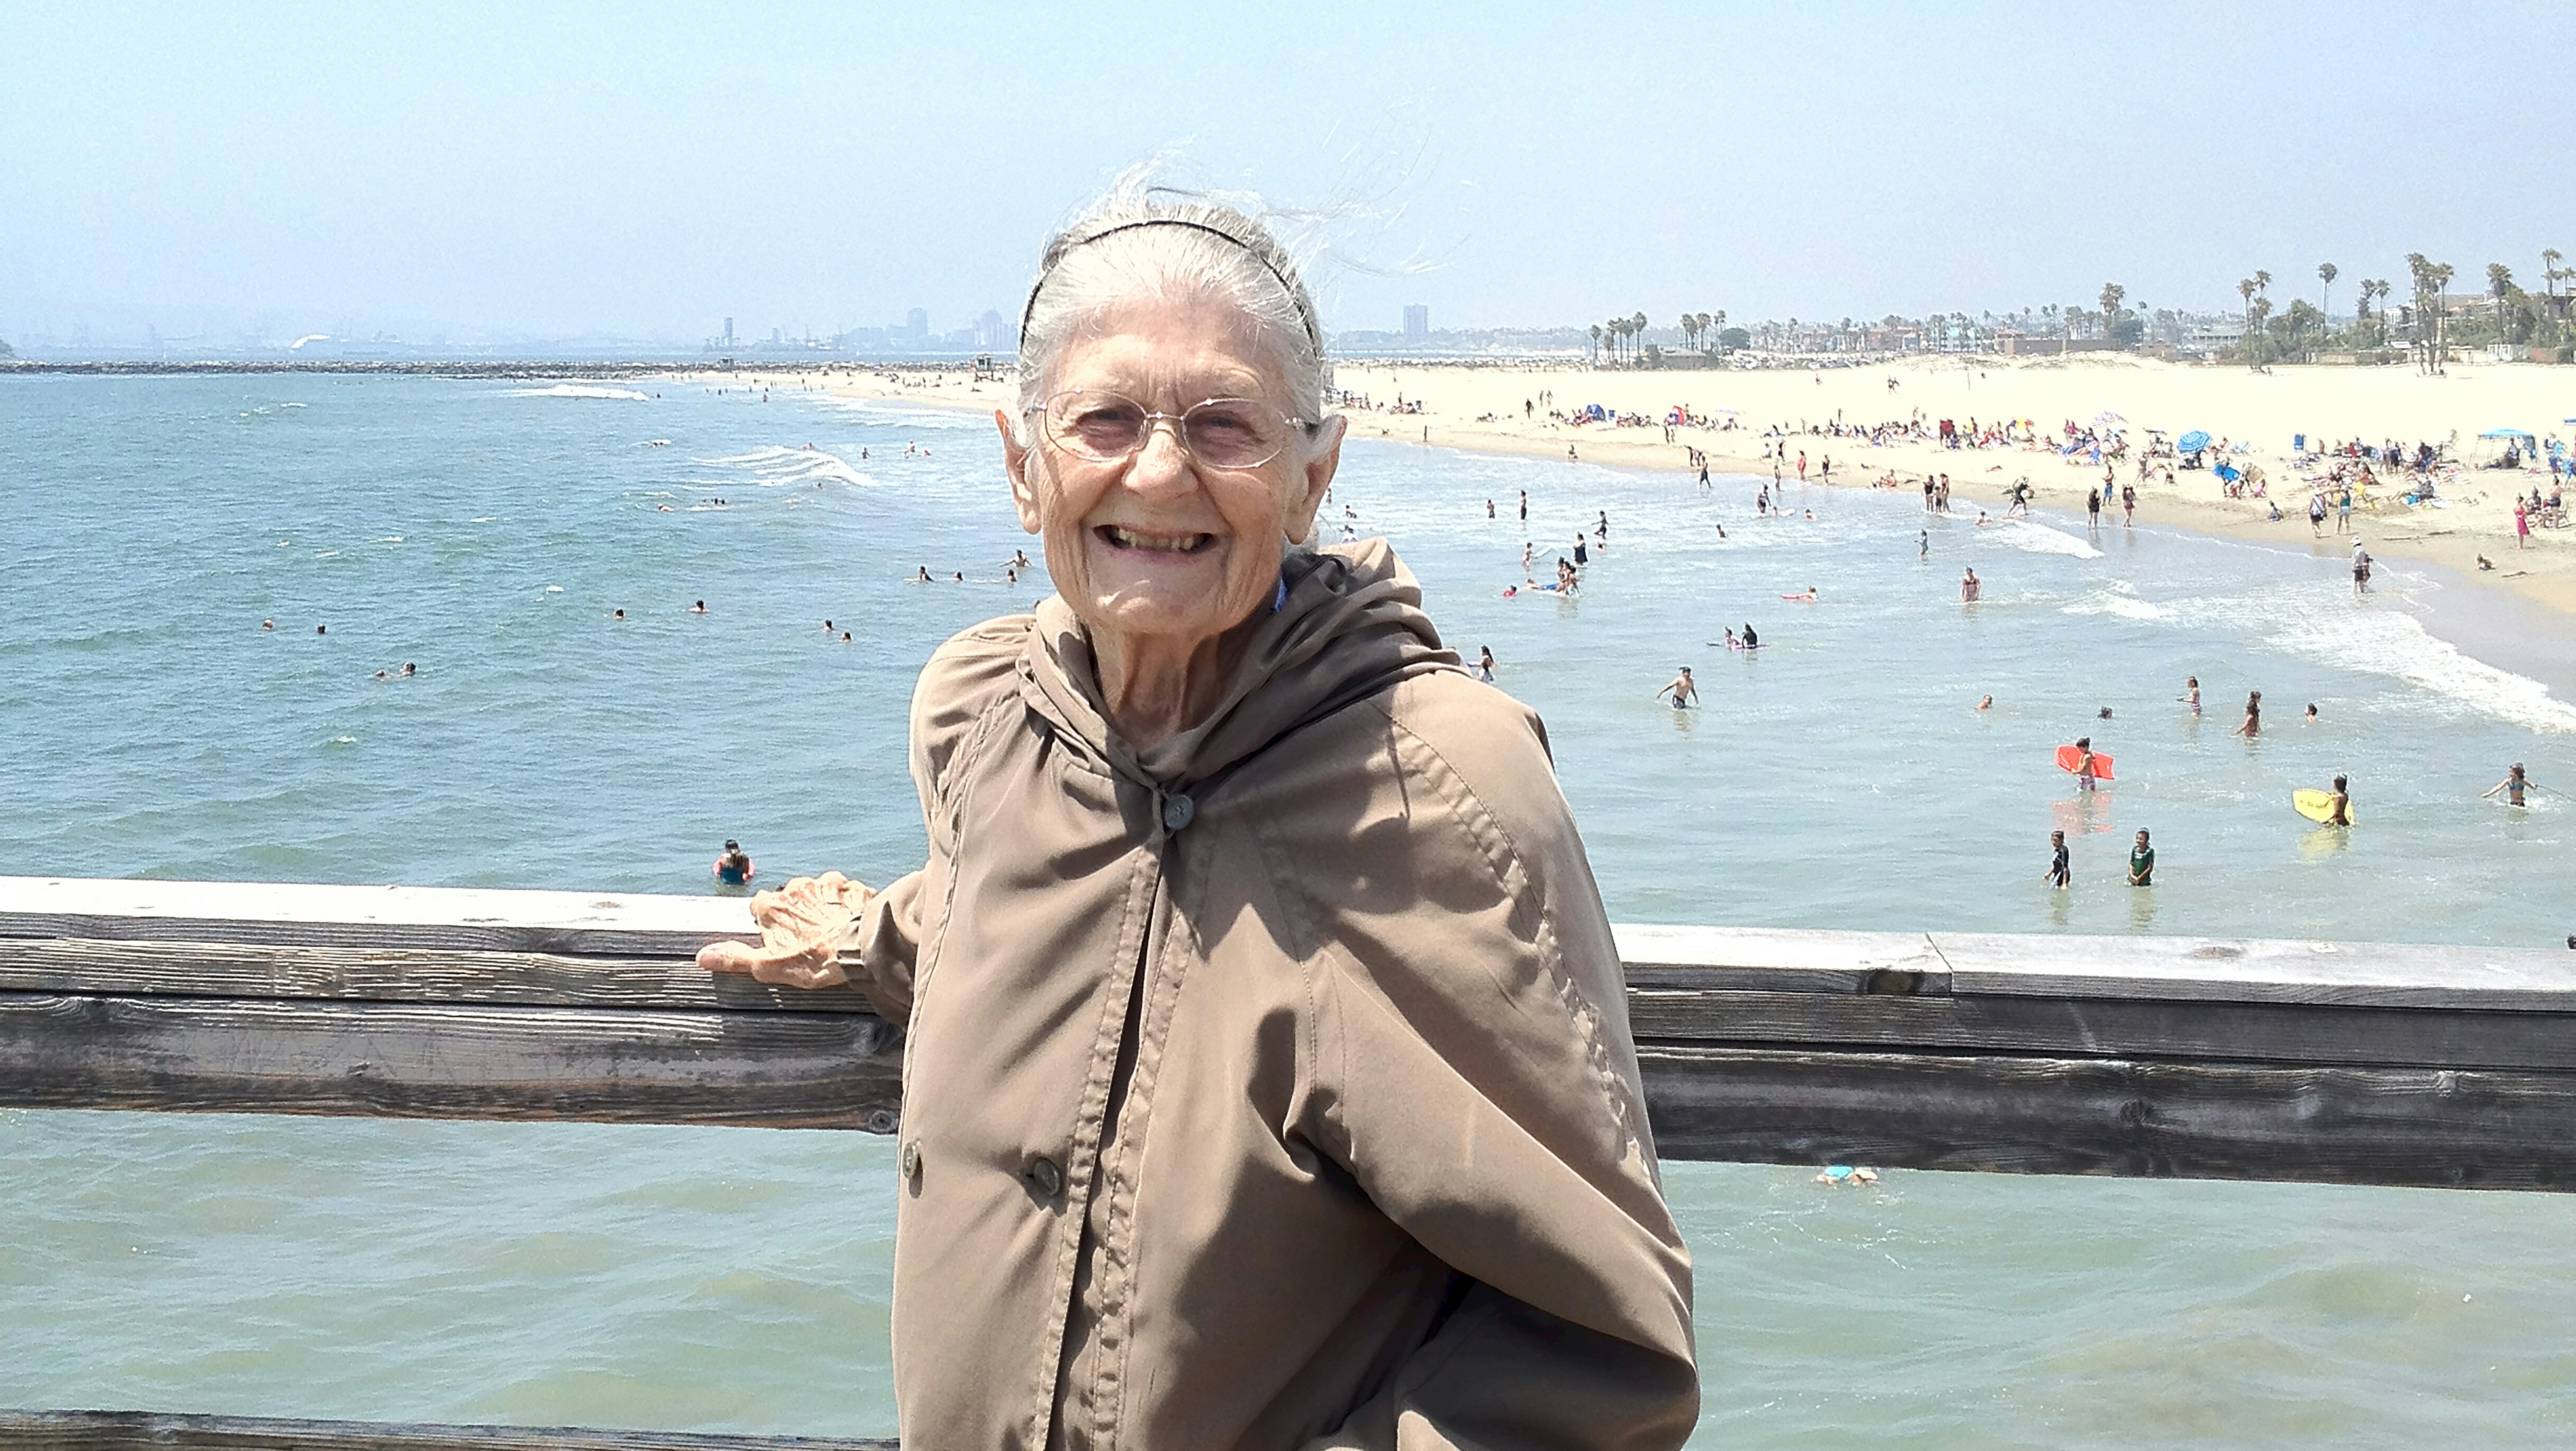 An older woman poses, smiling, at a wooden railing; in the distance behind her, people at the beach.